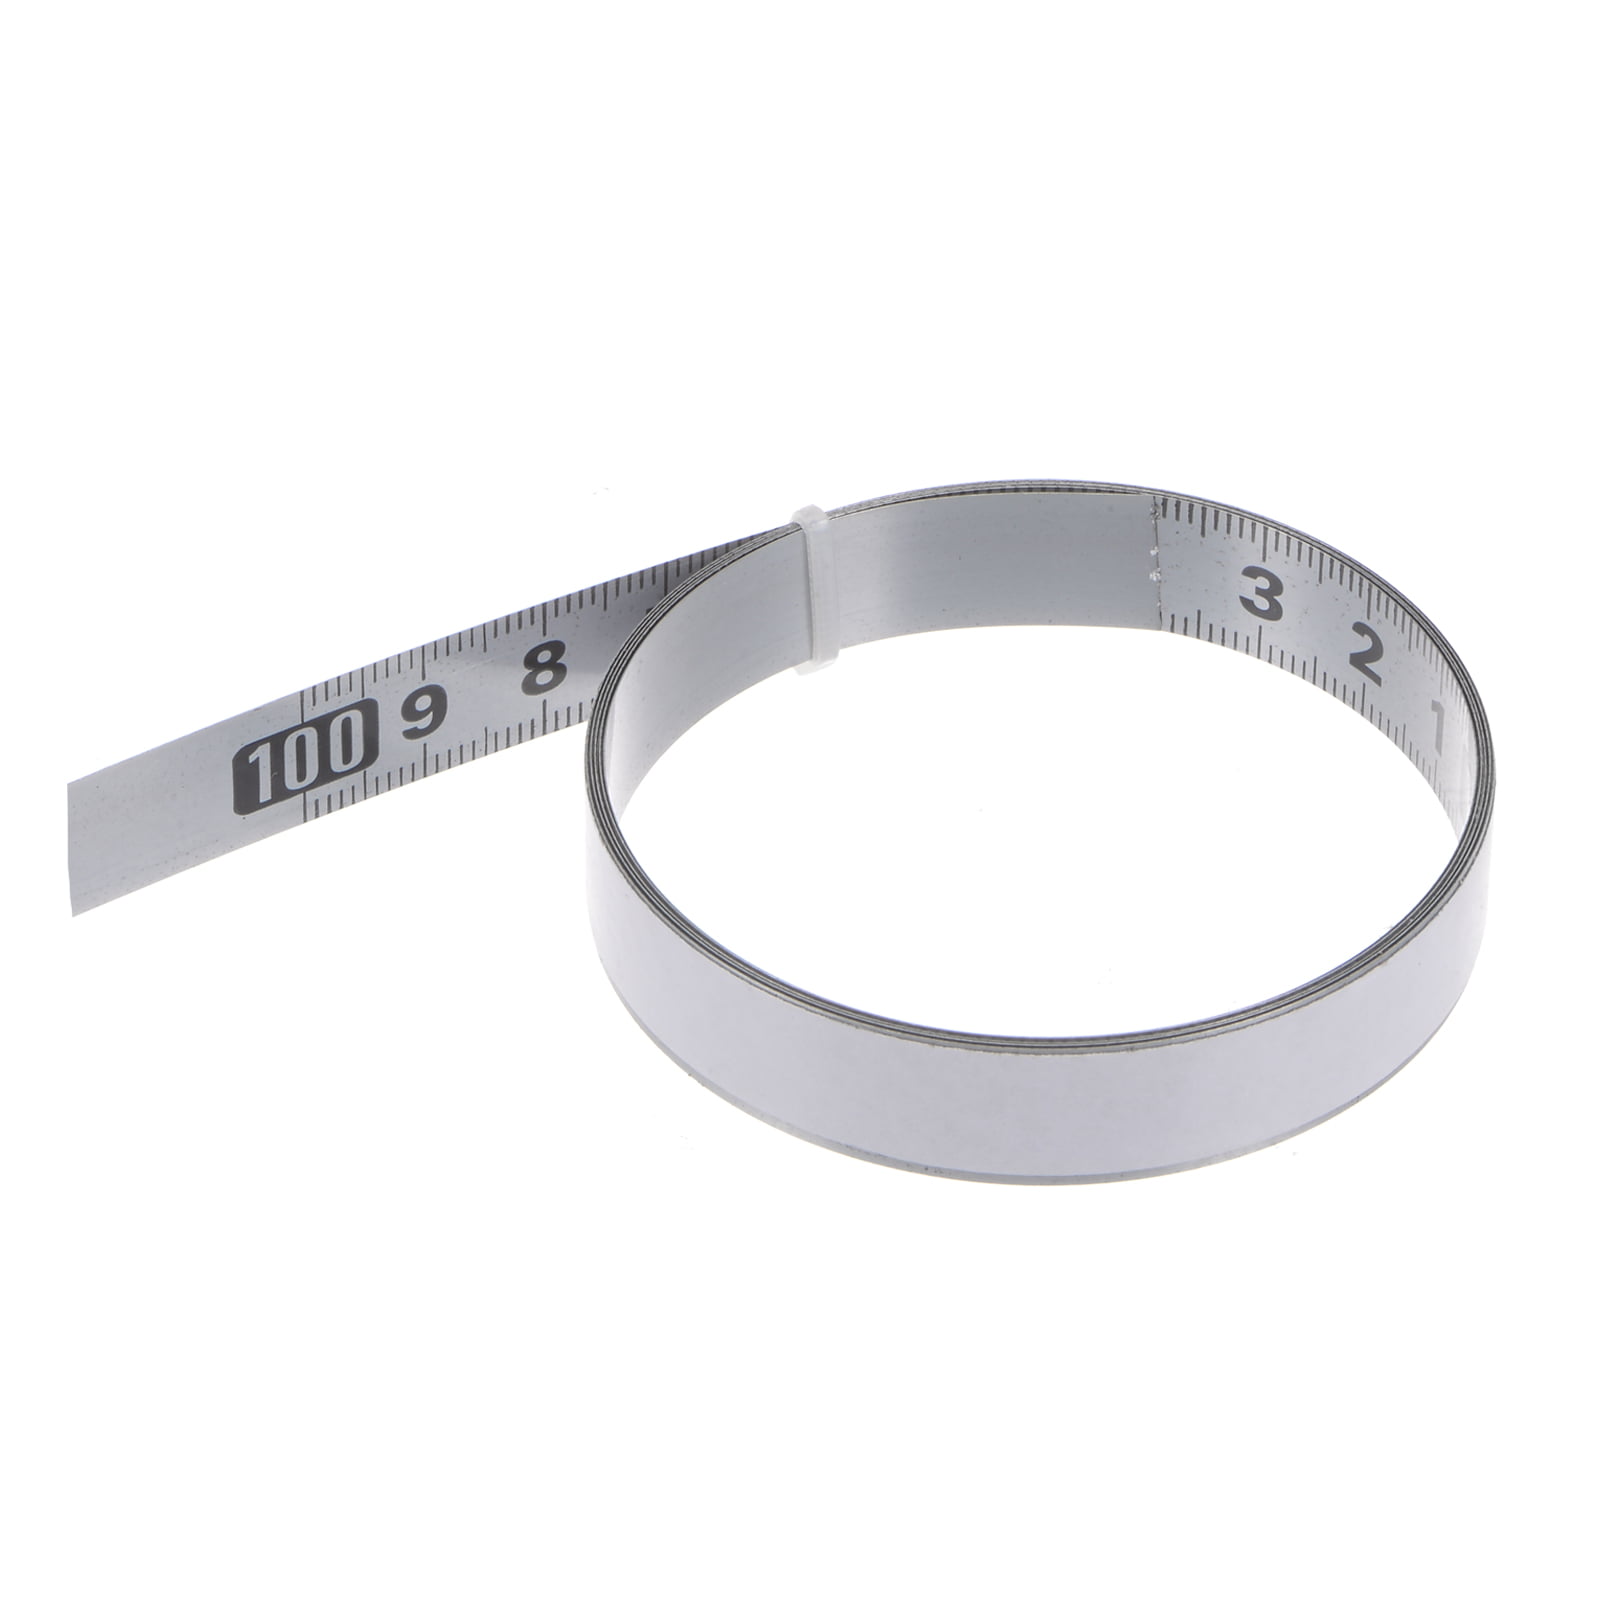 1pc Self-Adhesive Tape Measure, 1/2/3/4/5/6m Centered Measuring Ruler Self-Adhesive Stainless Steel Metric Track Tape Measure Scale Ruler for